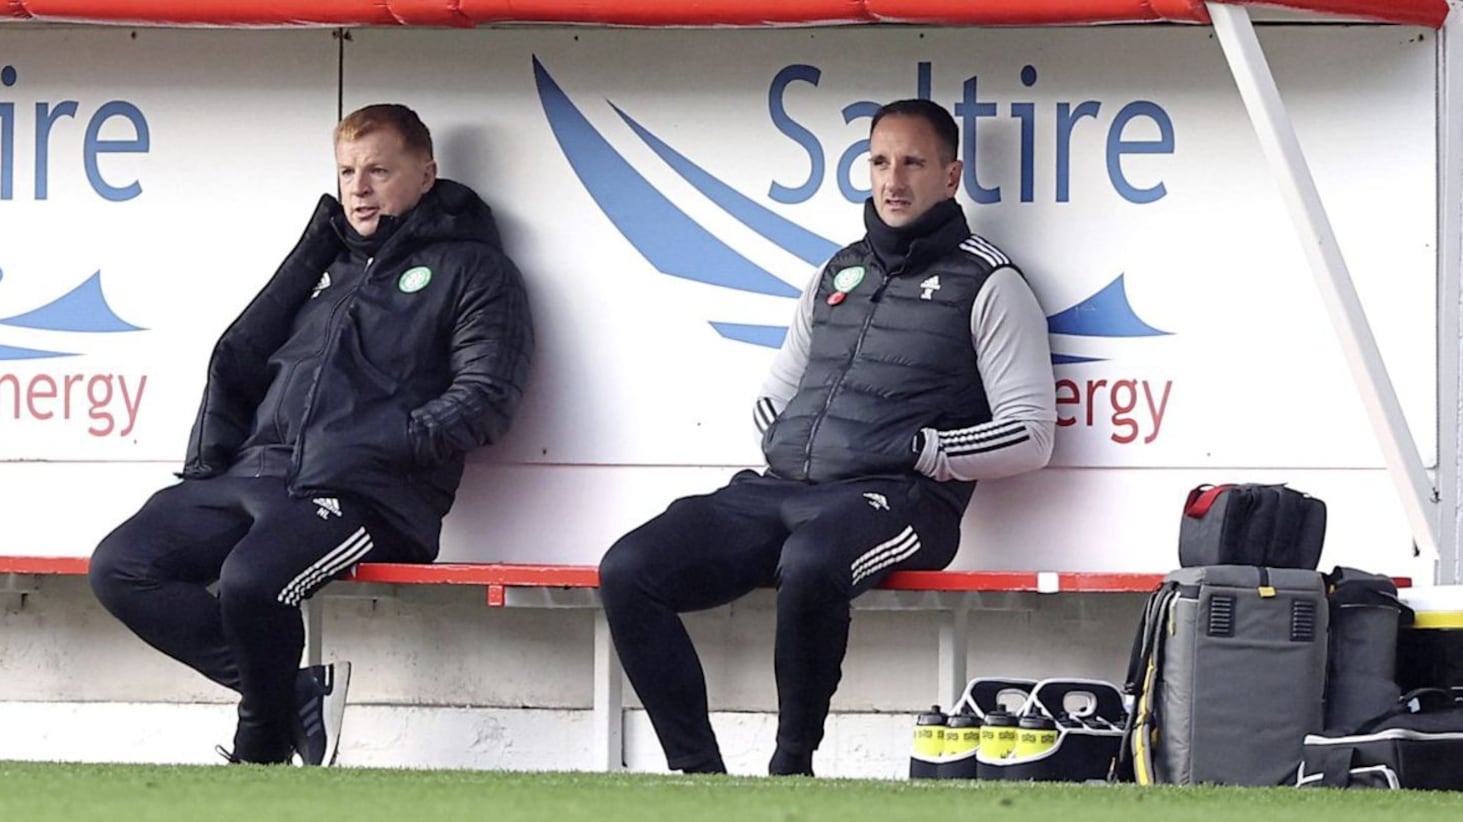 Celtic manager Neil Lennon (left) and his assistant John Kennedy on the bench during the Scottish Premiership match at Pittodrie Stadium, Aberdeen.. 